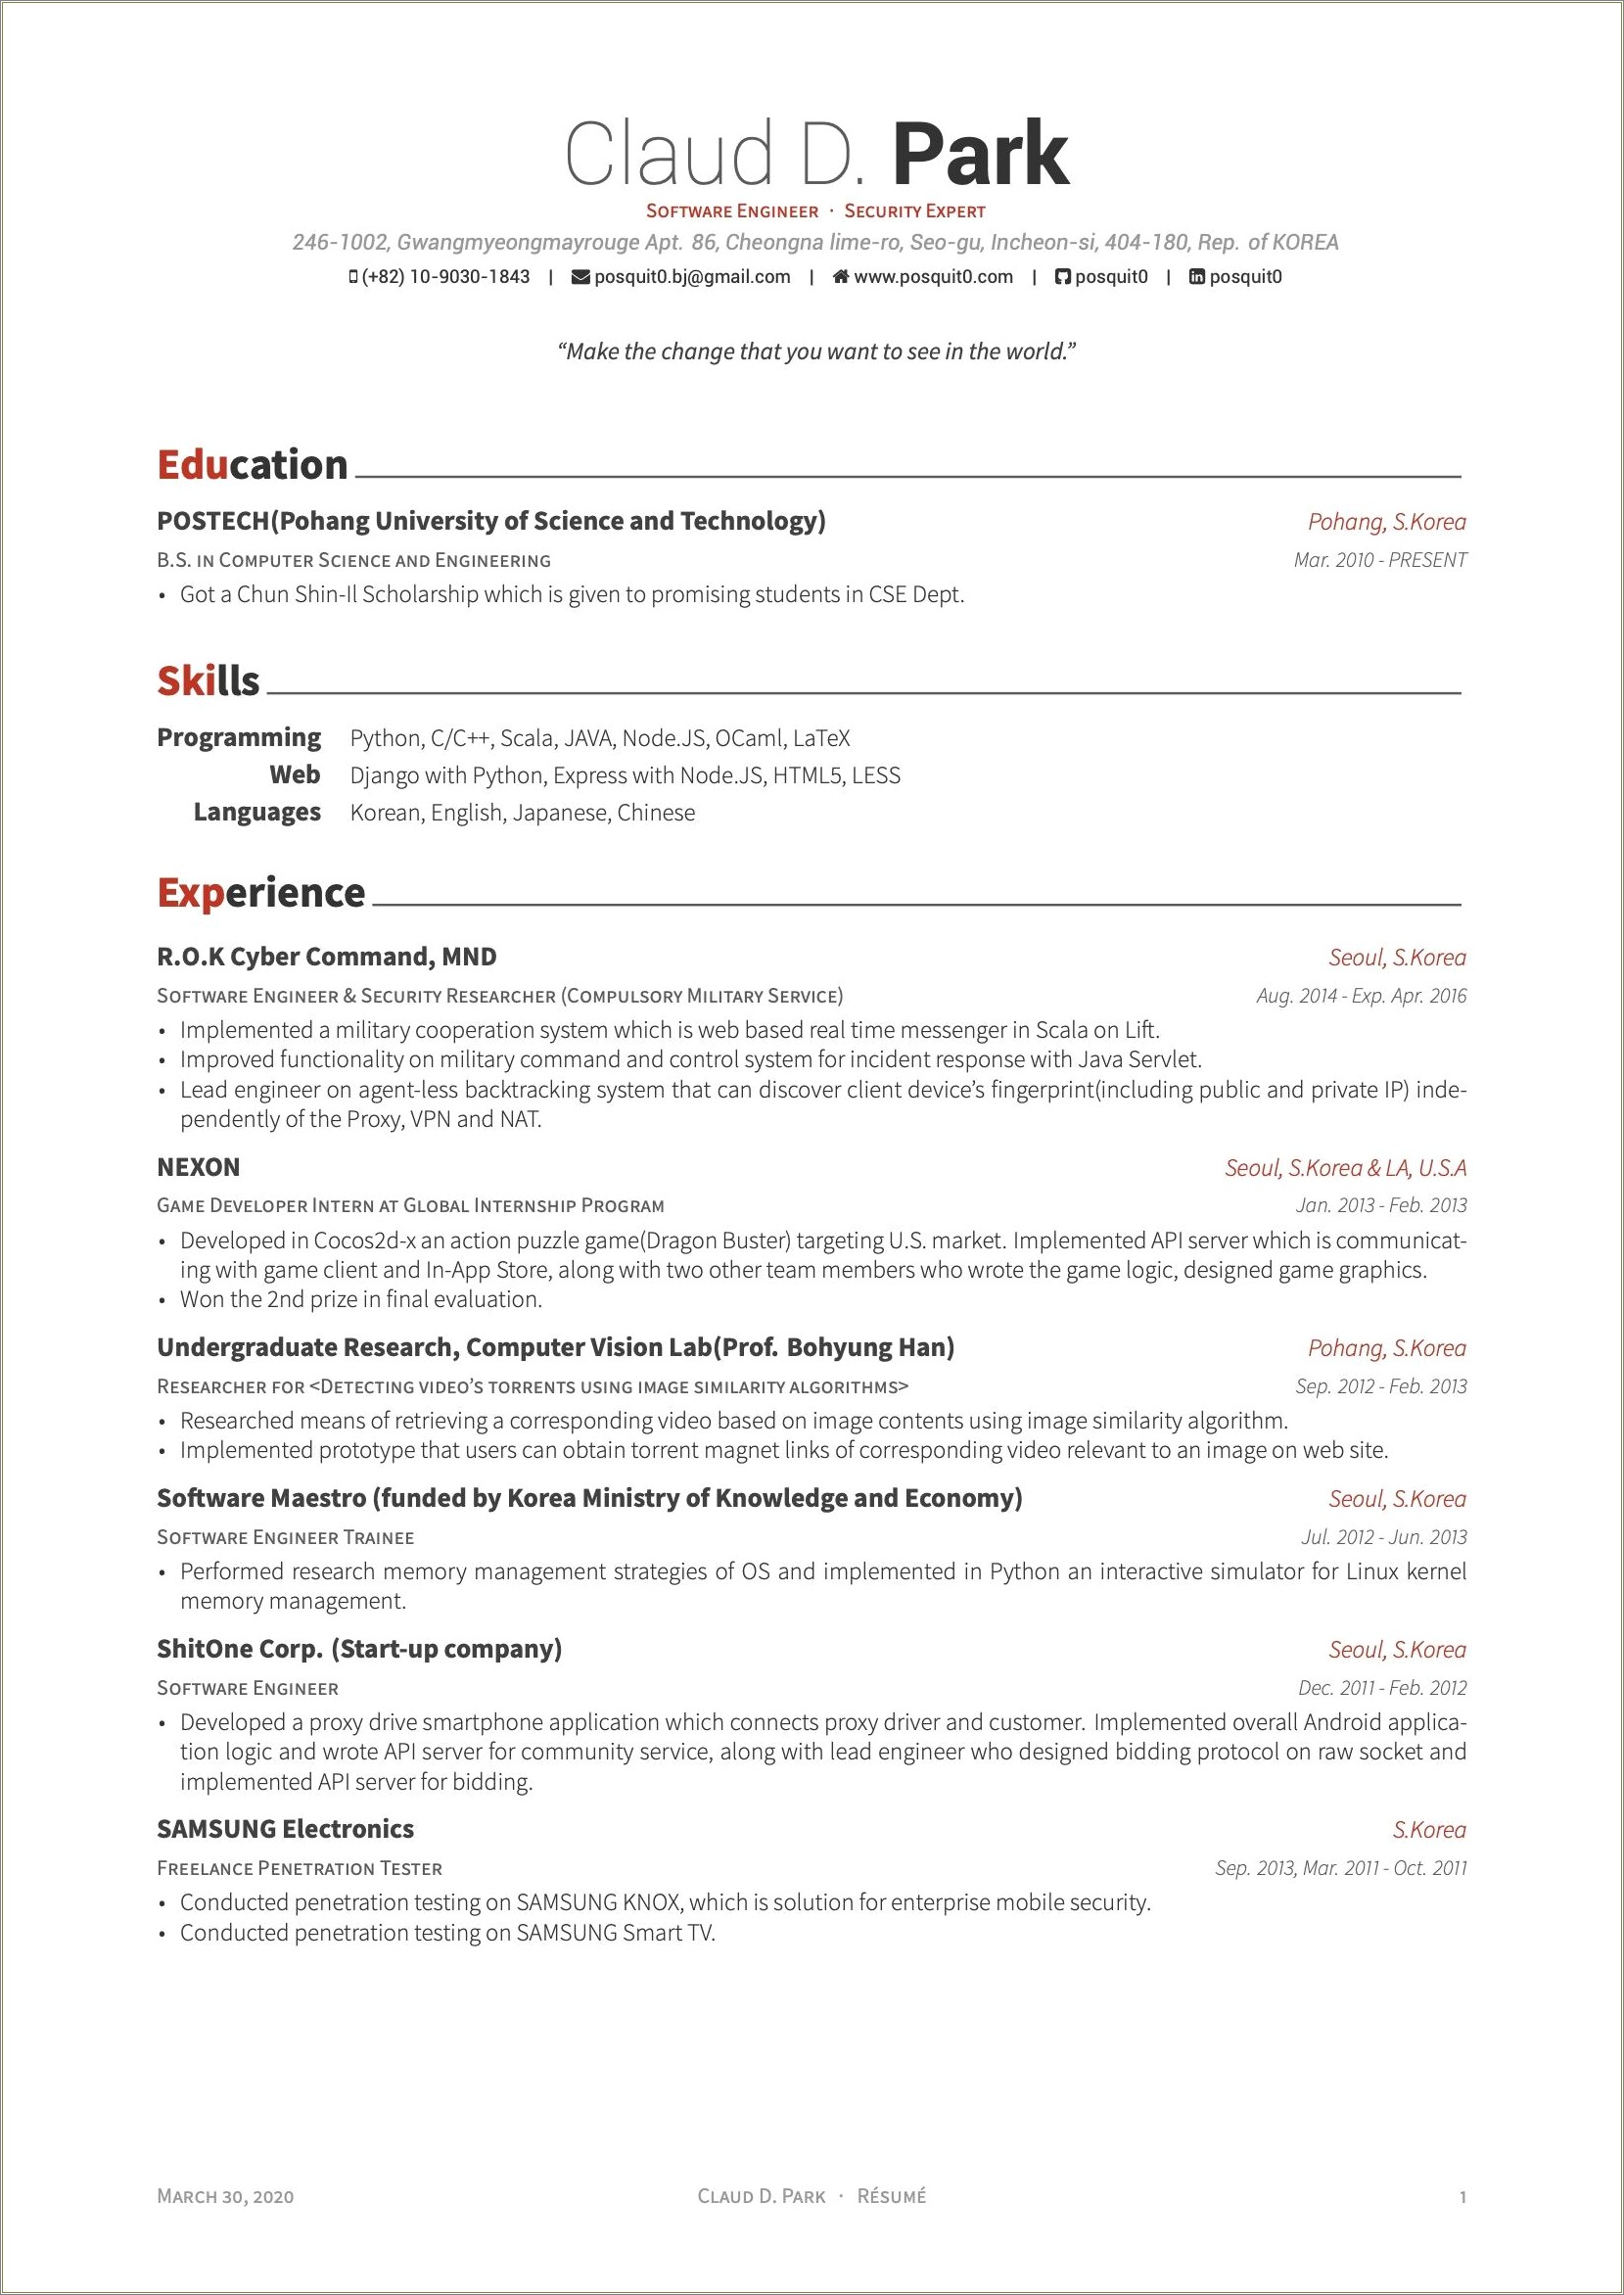 A Good Objective Paragraph For Engineering Intern Resume